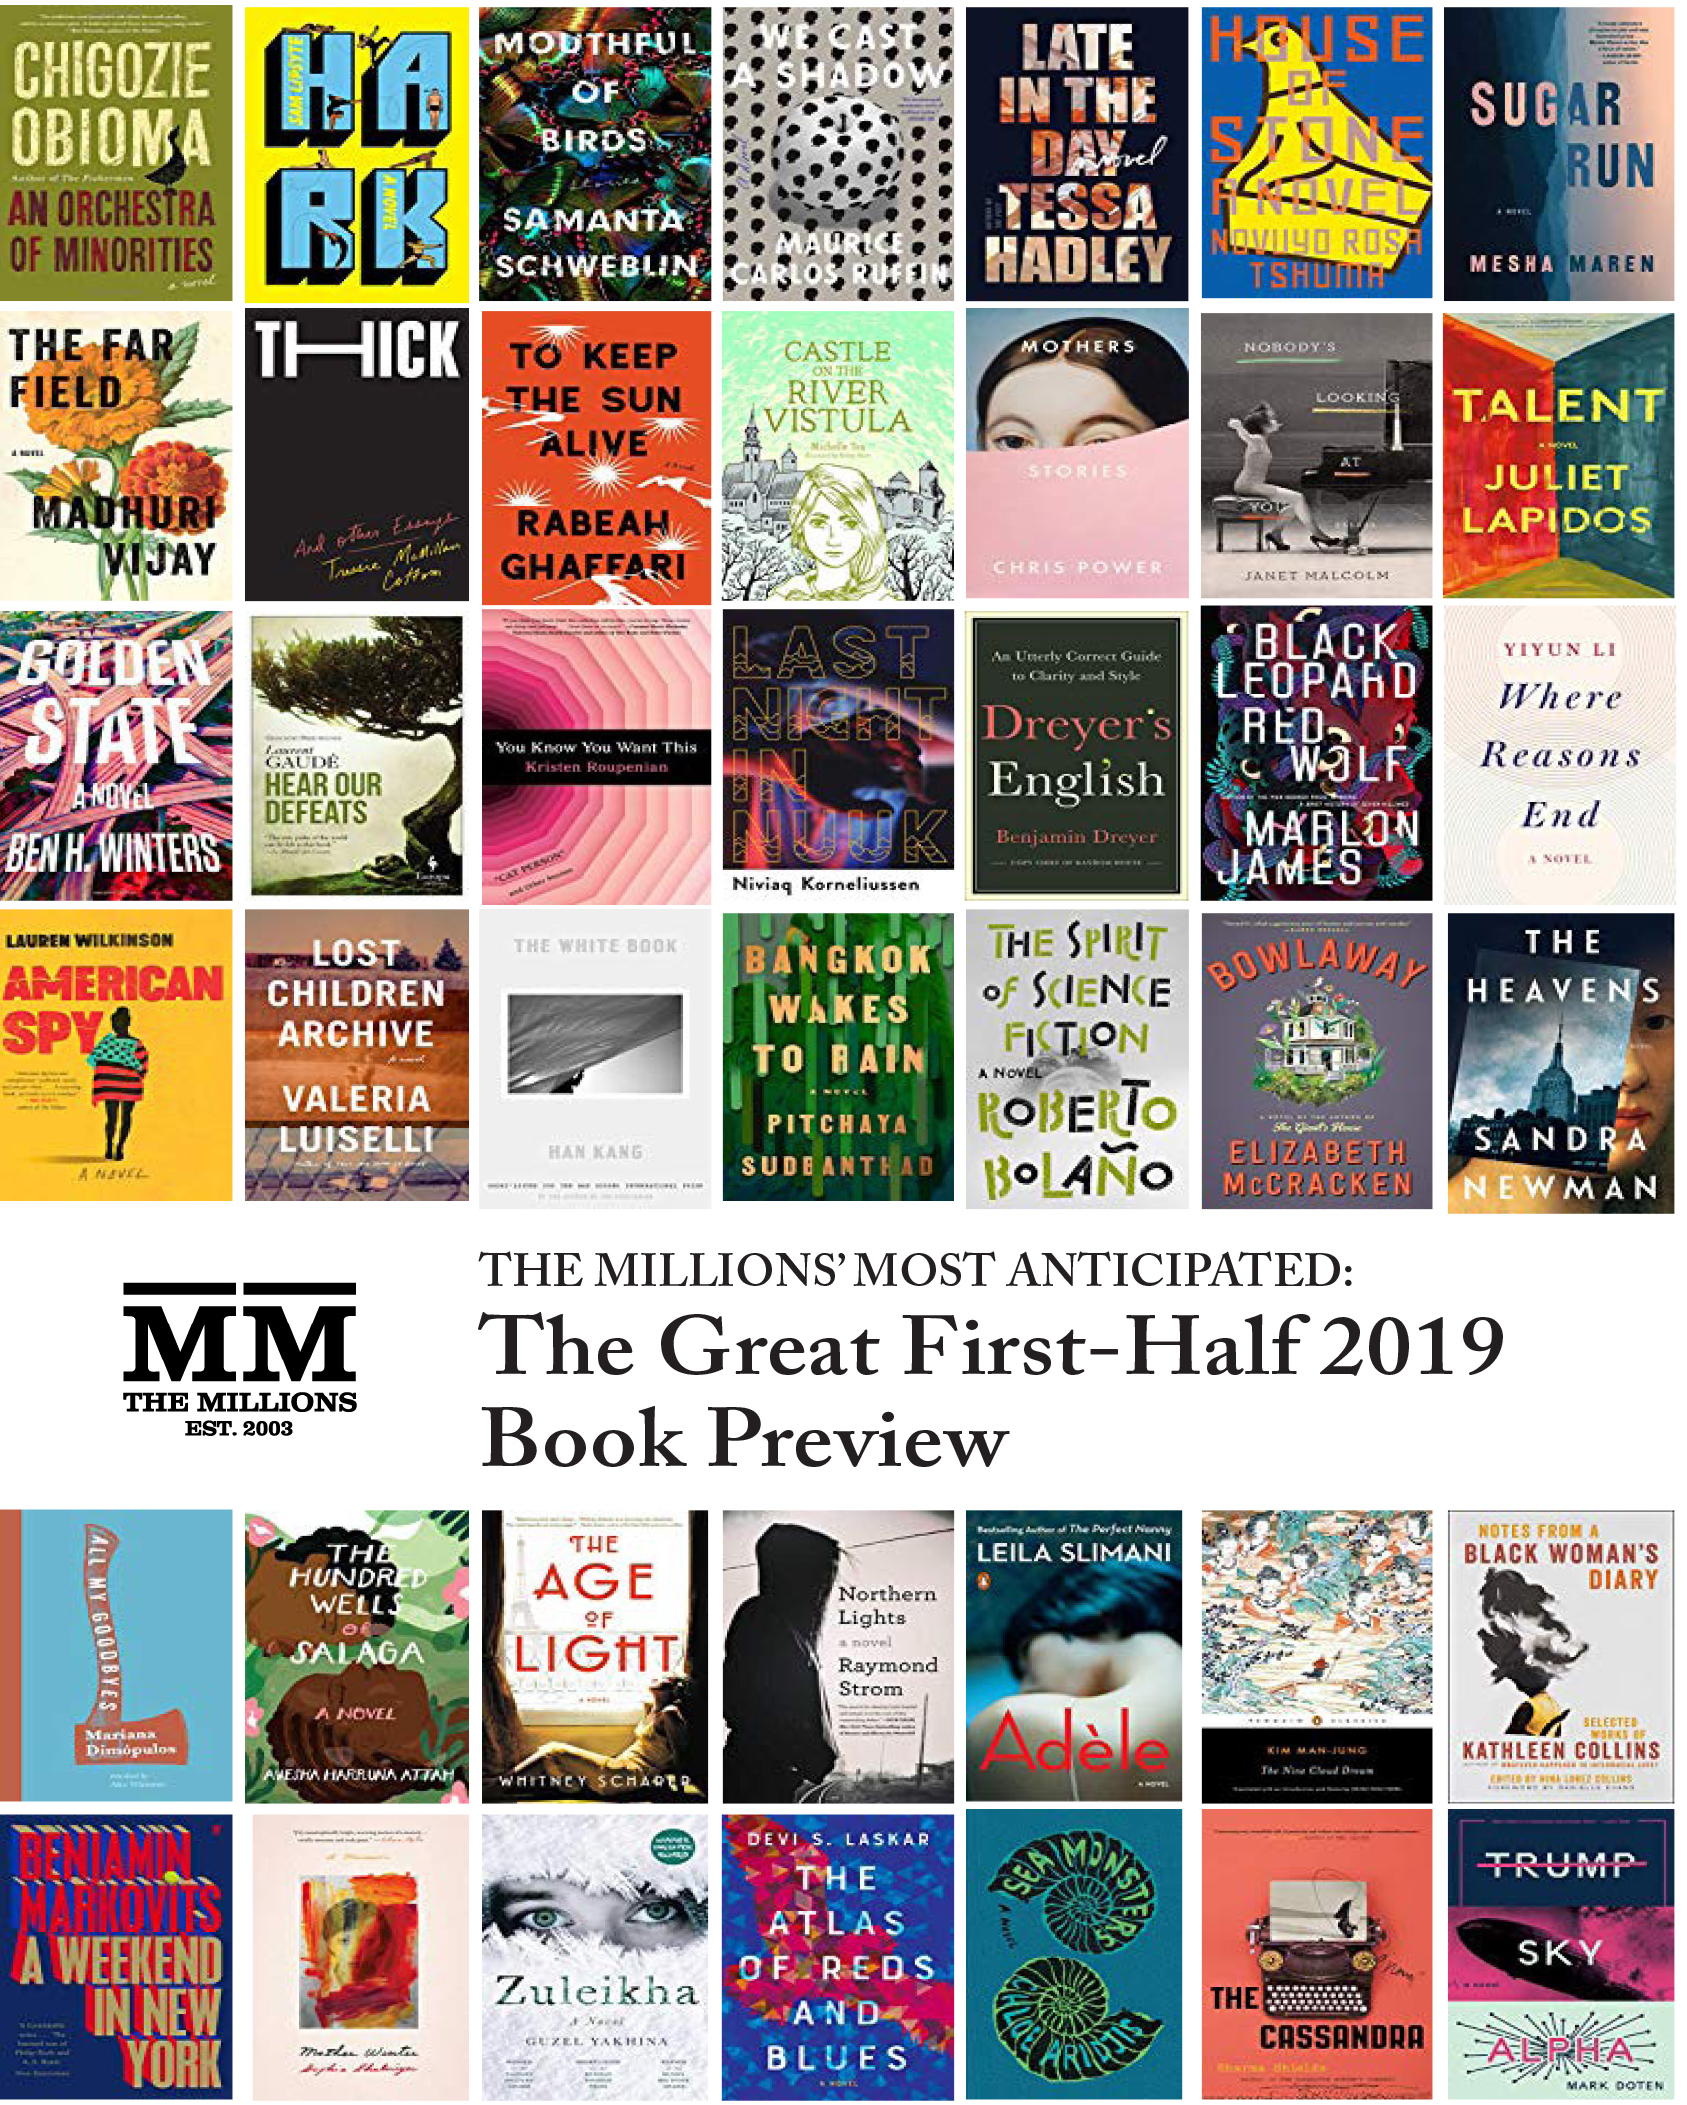 Most Anticipated The Great First-Half 2019 Book Preview picture photo image